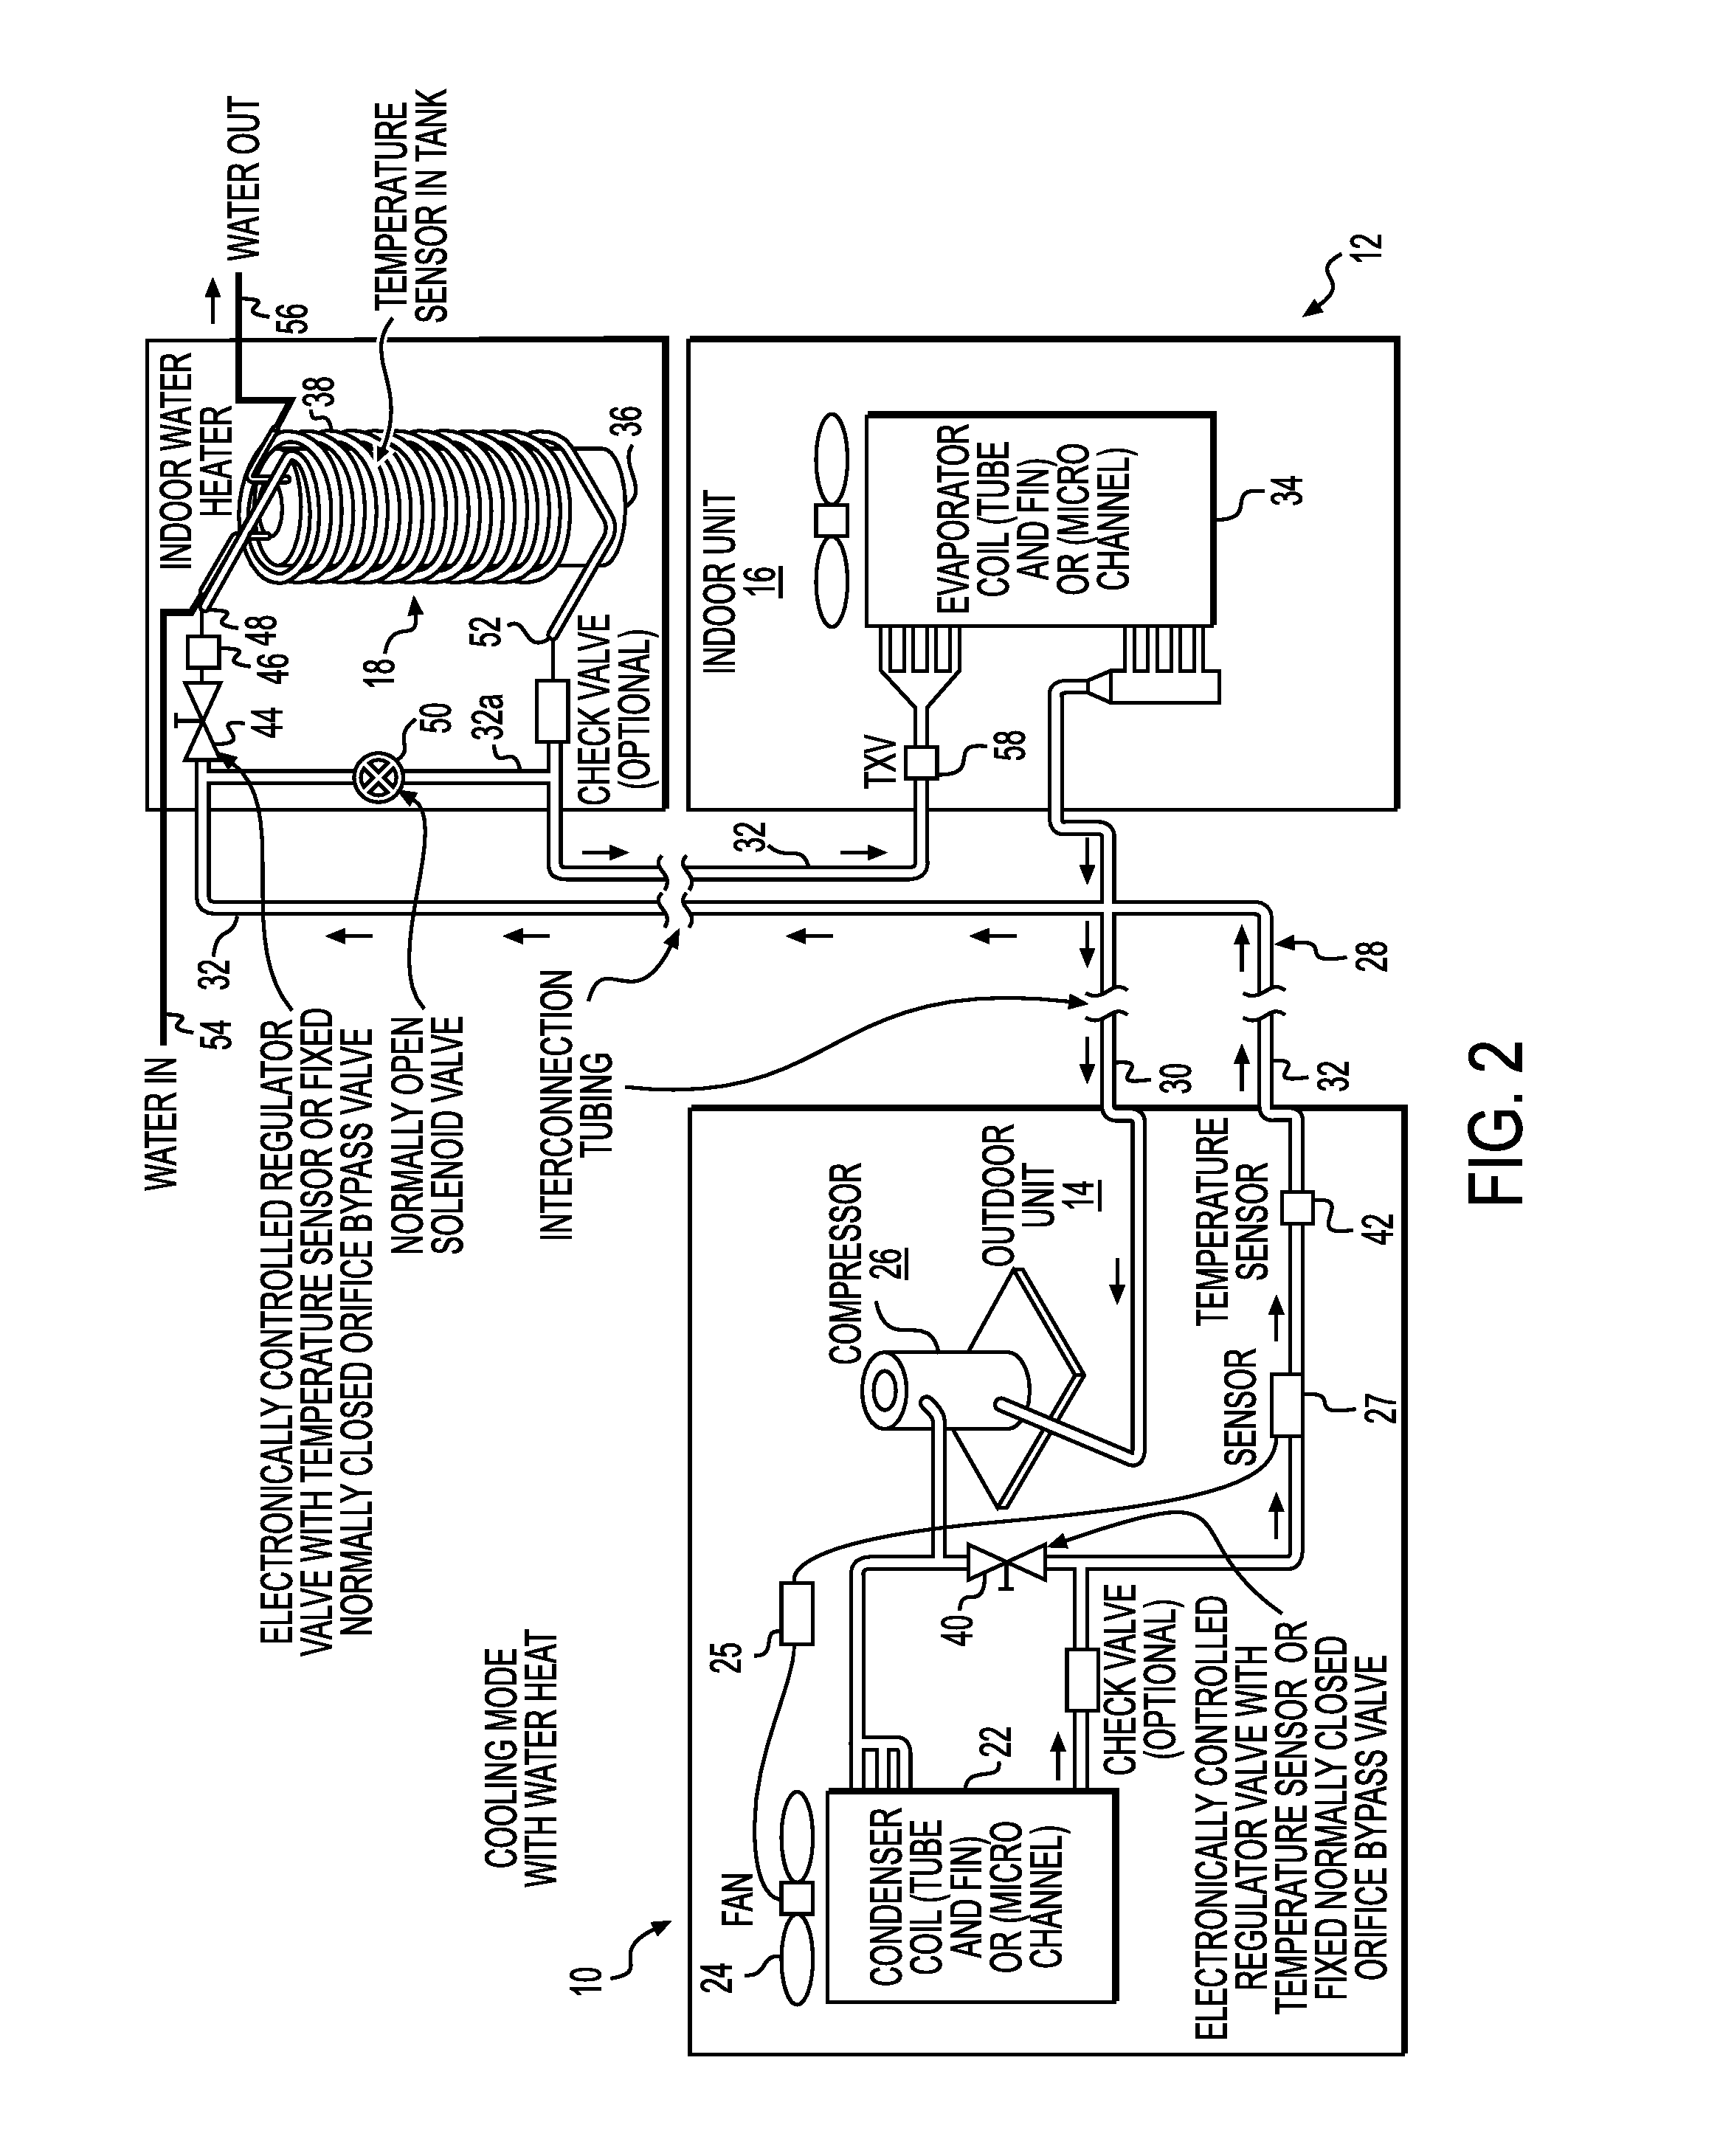 Apparatus and methods for heating water with refrigerant from air conditioning system